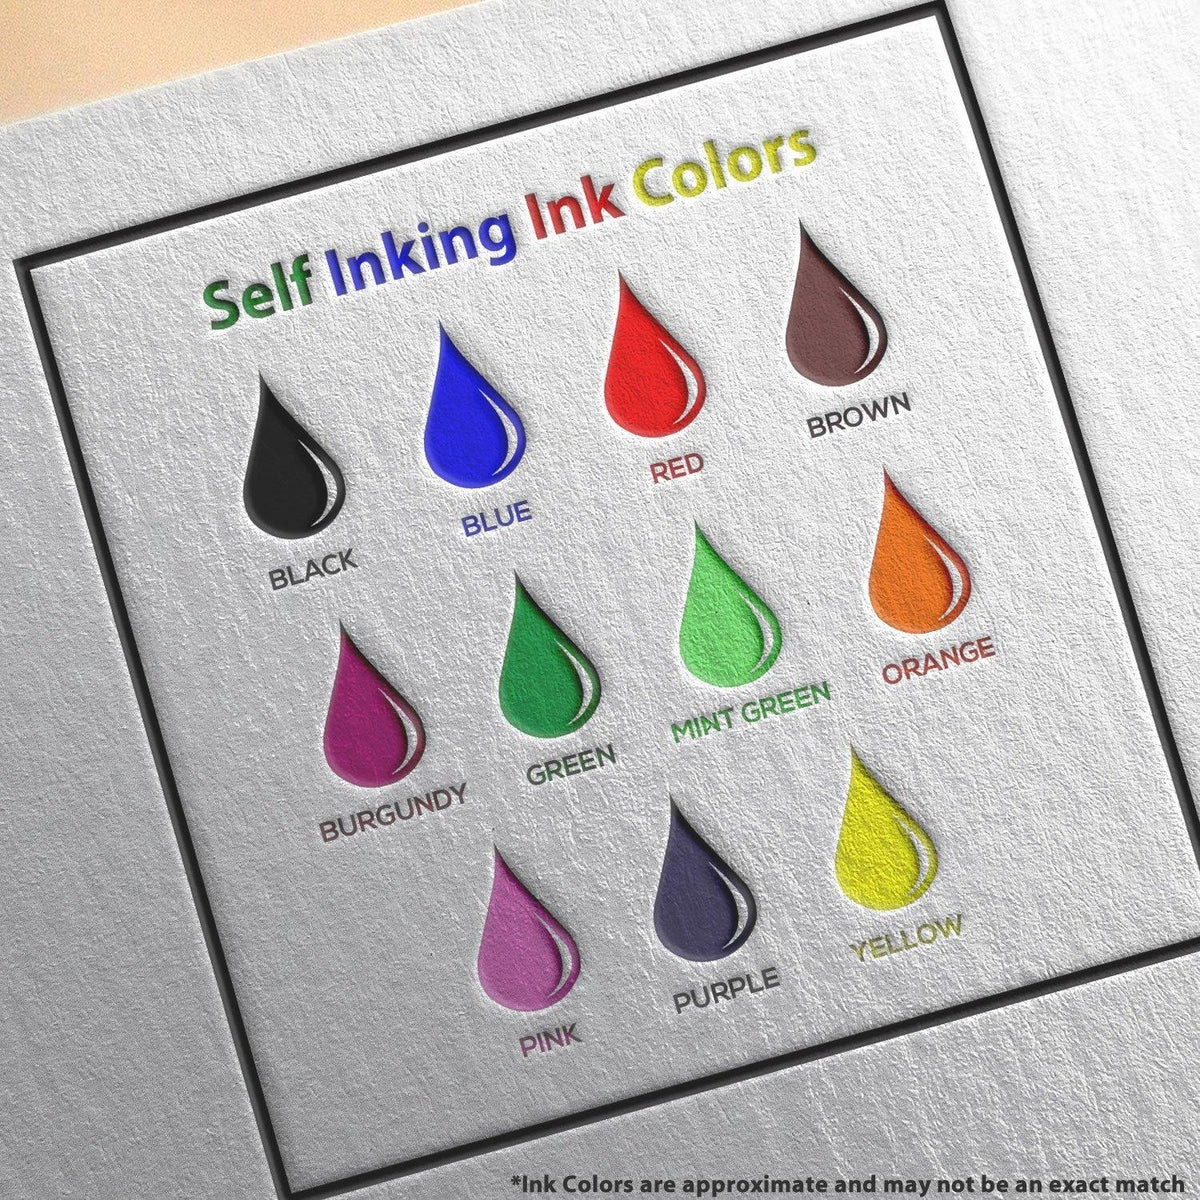 Self-Inking Your Work is Out of this world Stamp - Engineer Seal Stamps - Brand_Trodat, Impression Size_Small, Stamp Type_Self-Inking Stamp, Type of Use_Teacher